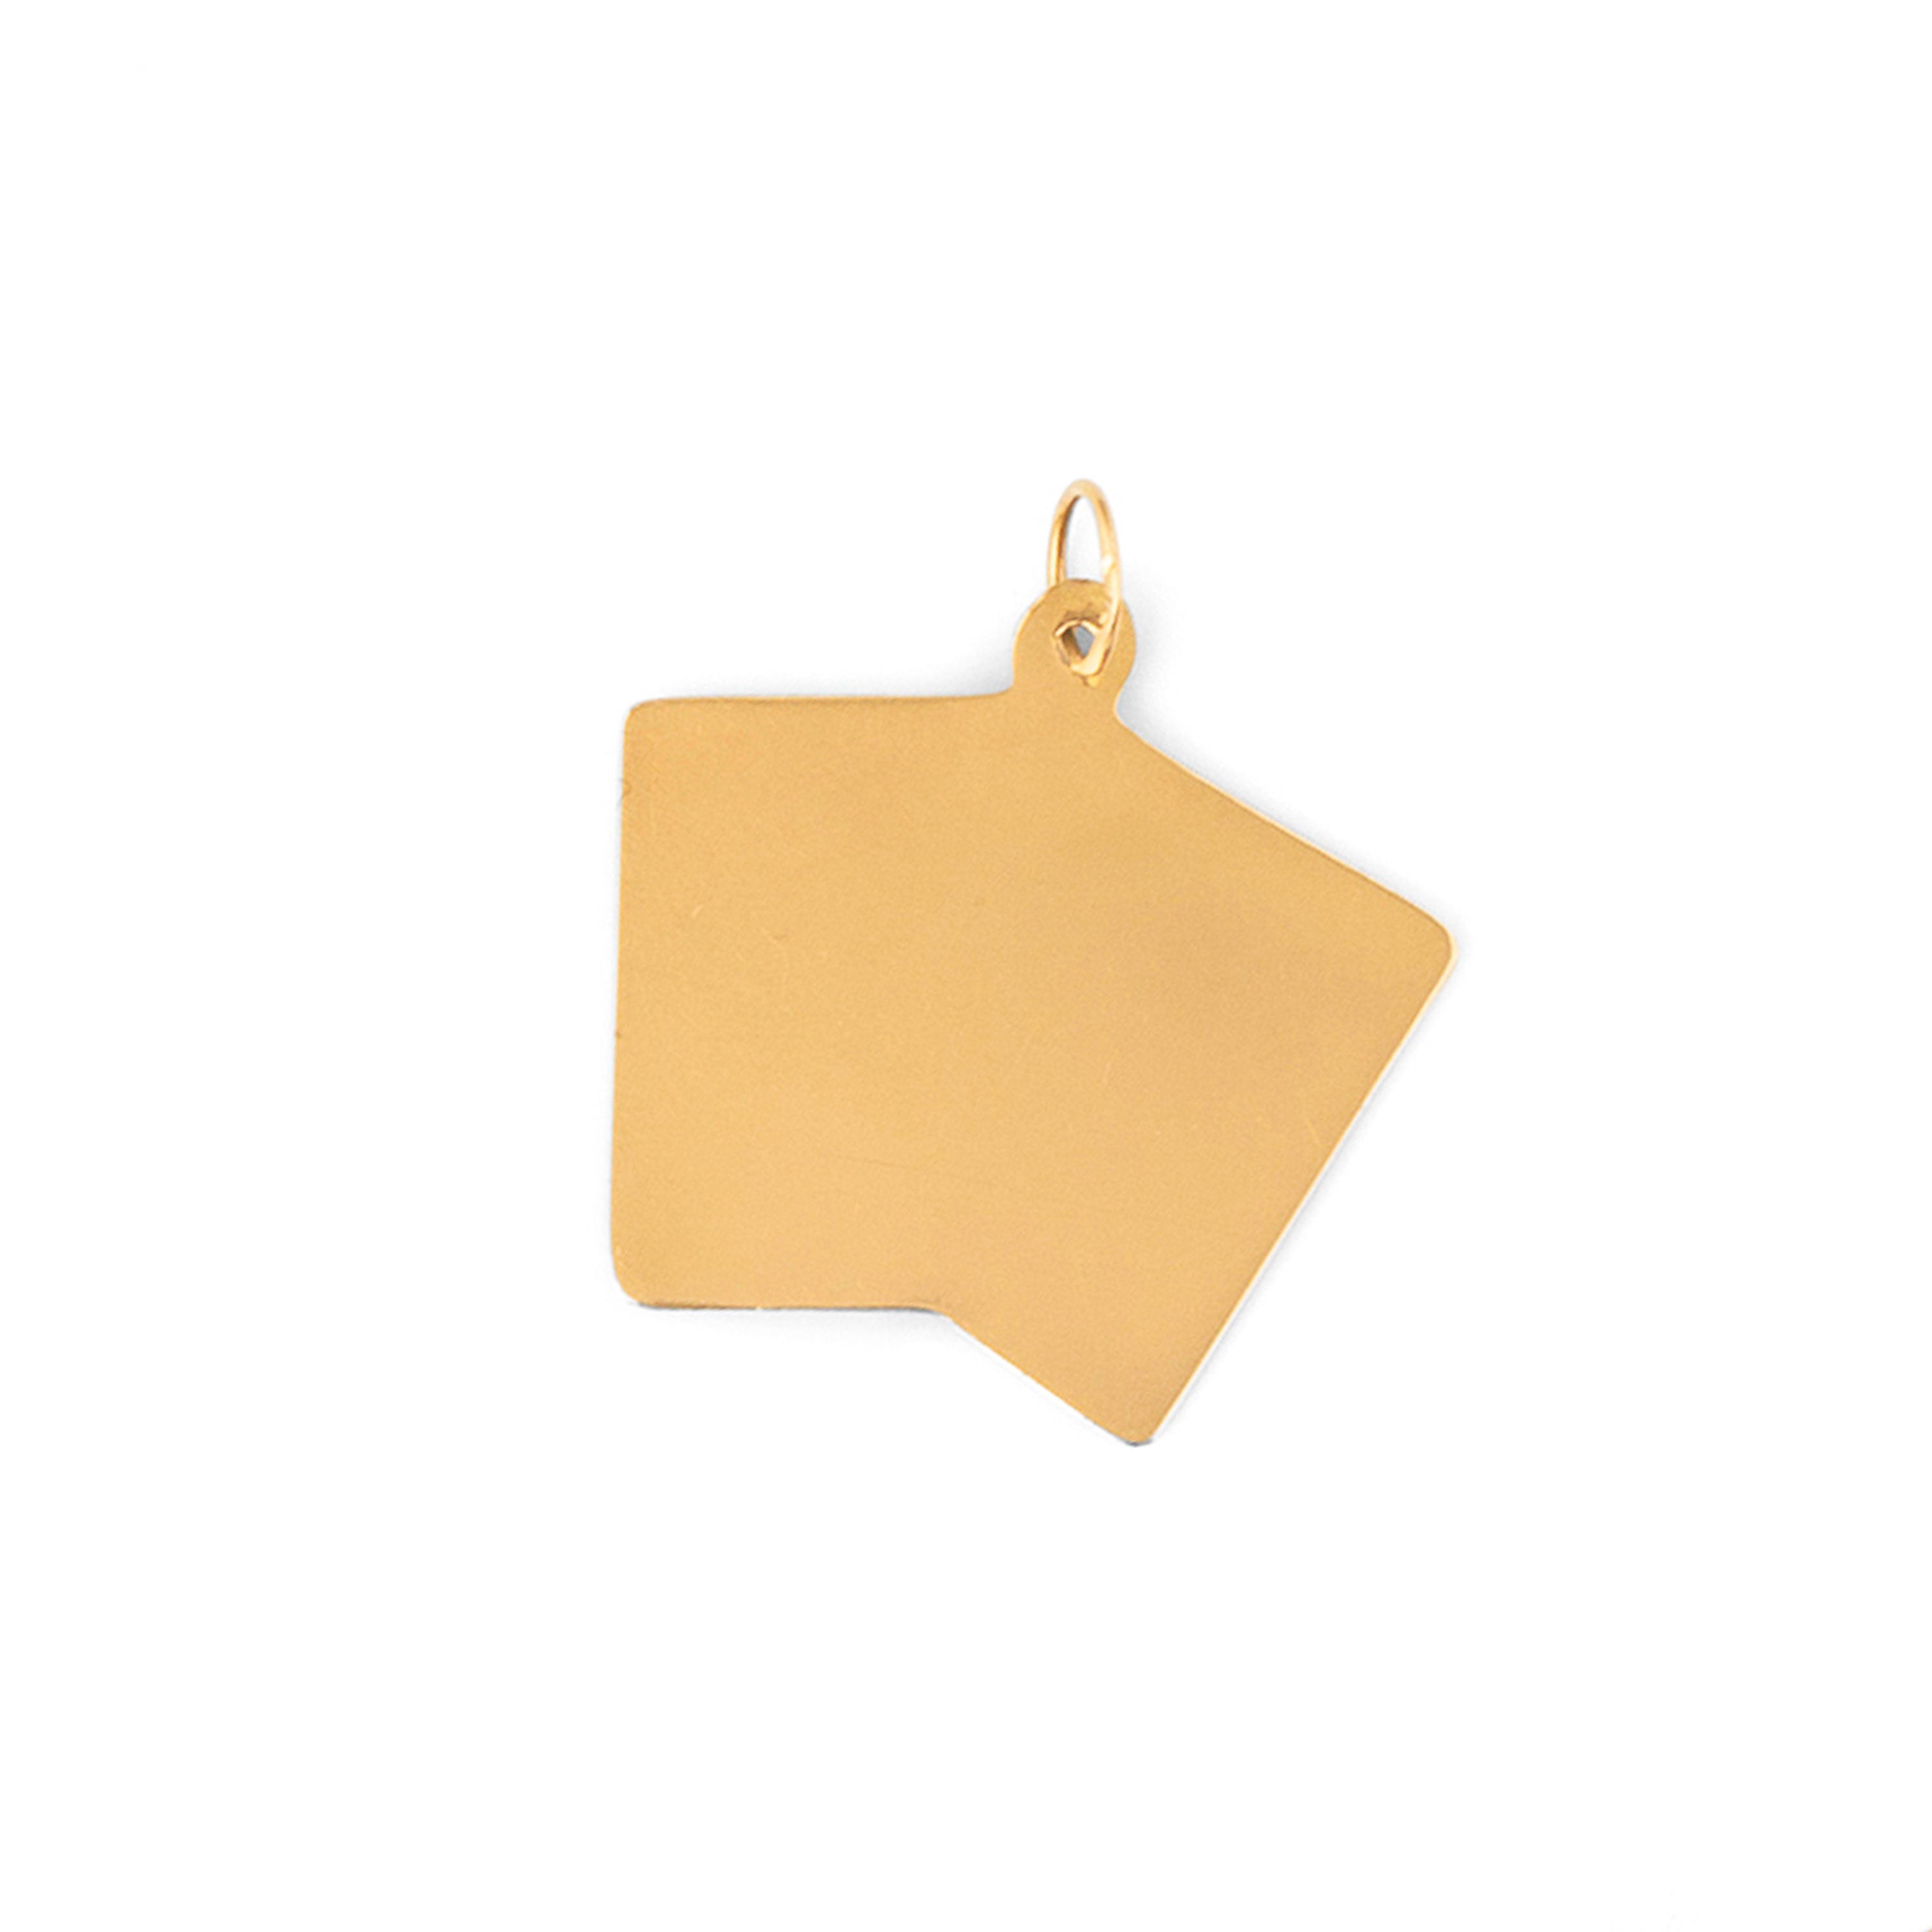 "21" 14k gold and enamel card charm